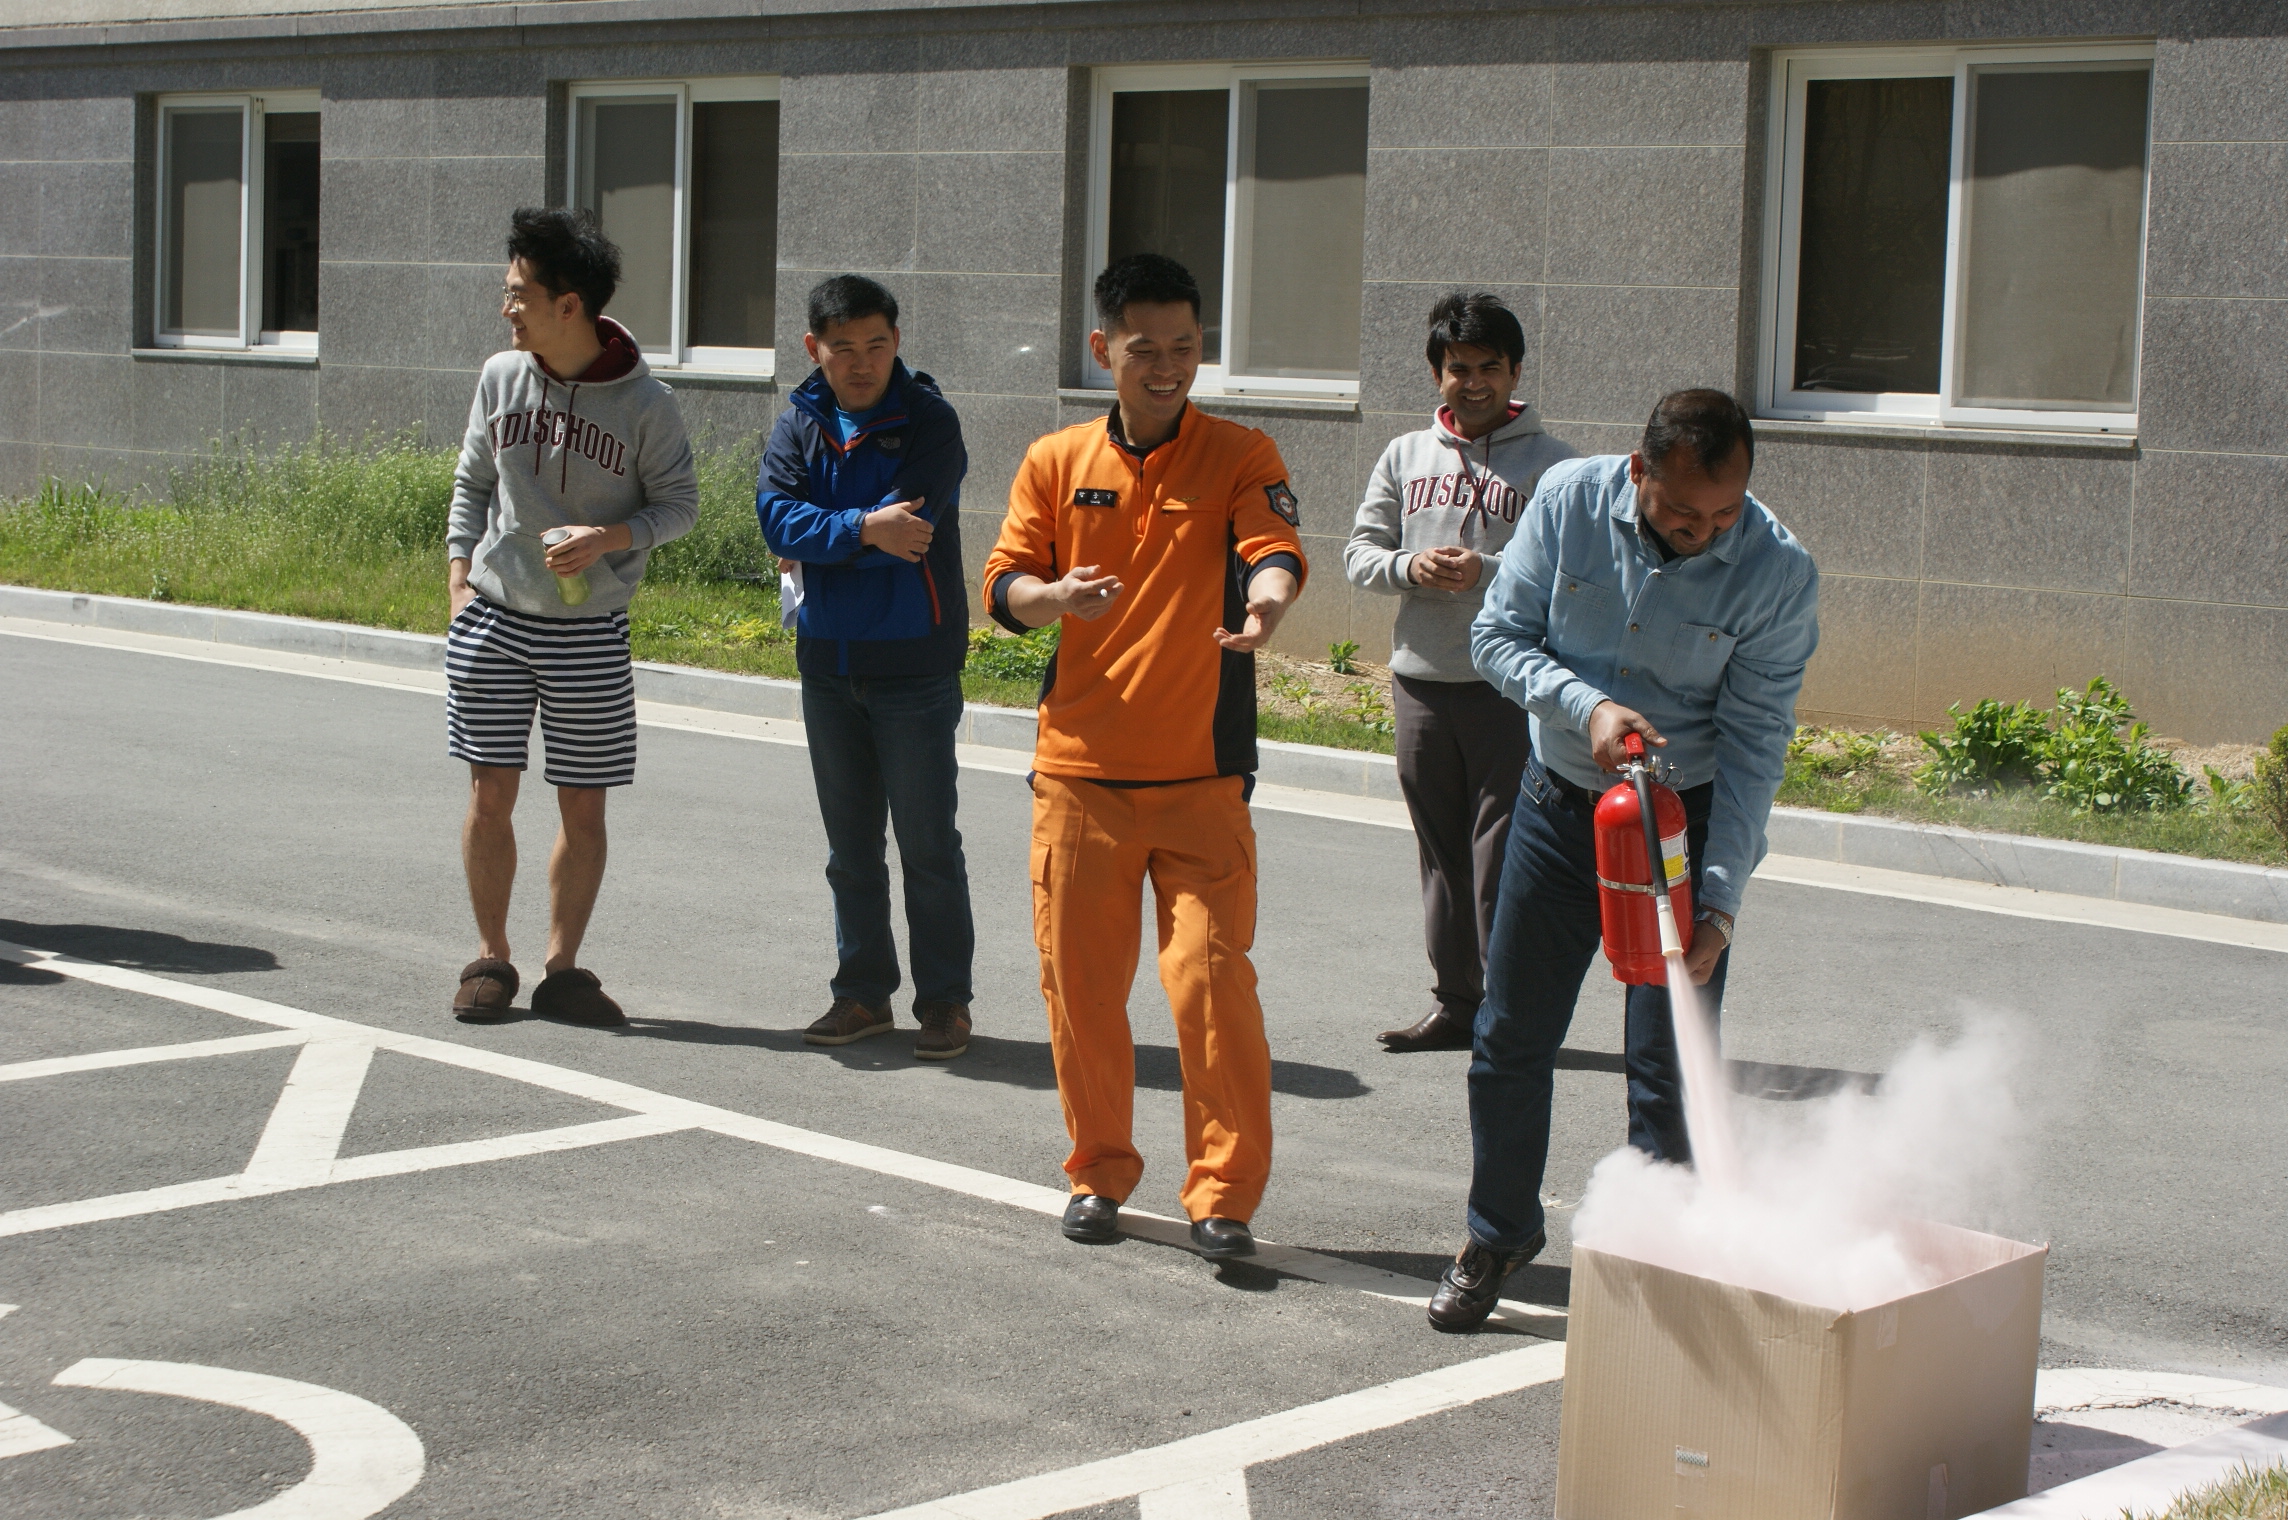 The Fire drill: enjoy studying and stay safe at the KDI School